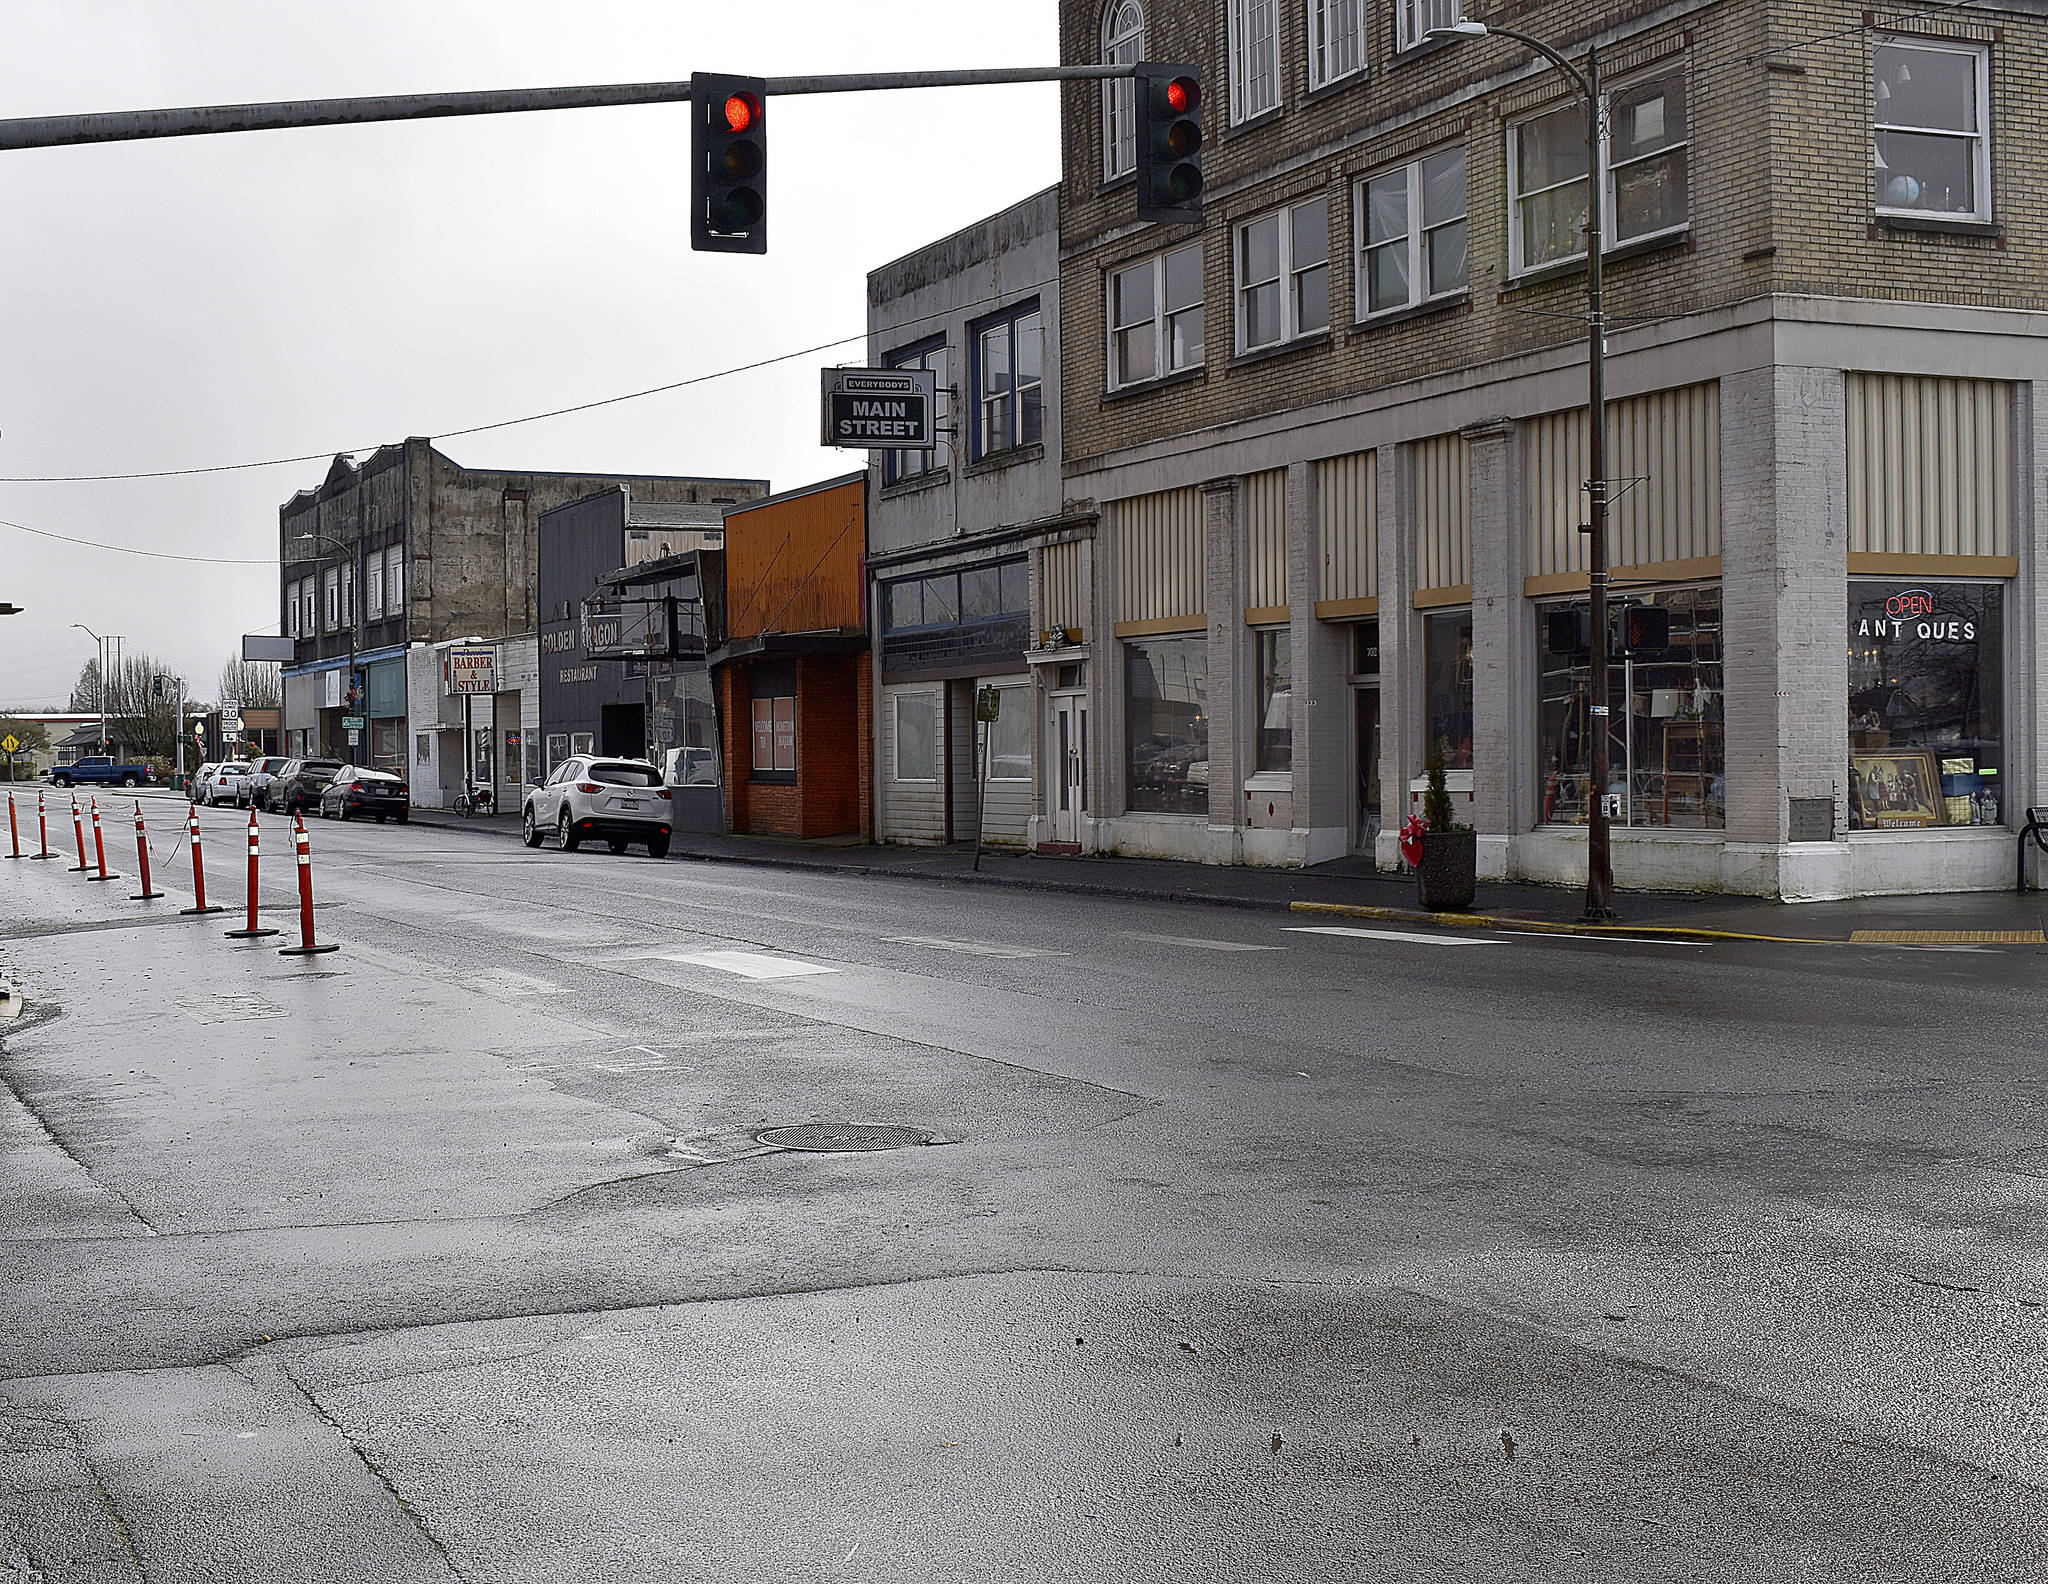 The Daily World | File Photo
The city of Hoquiam is eligible to receive $2,416,026 in American Rescue Act COVID relief money. The city made the announcement on Monday.